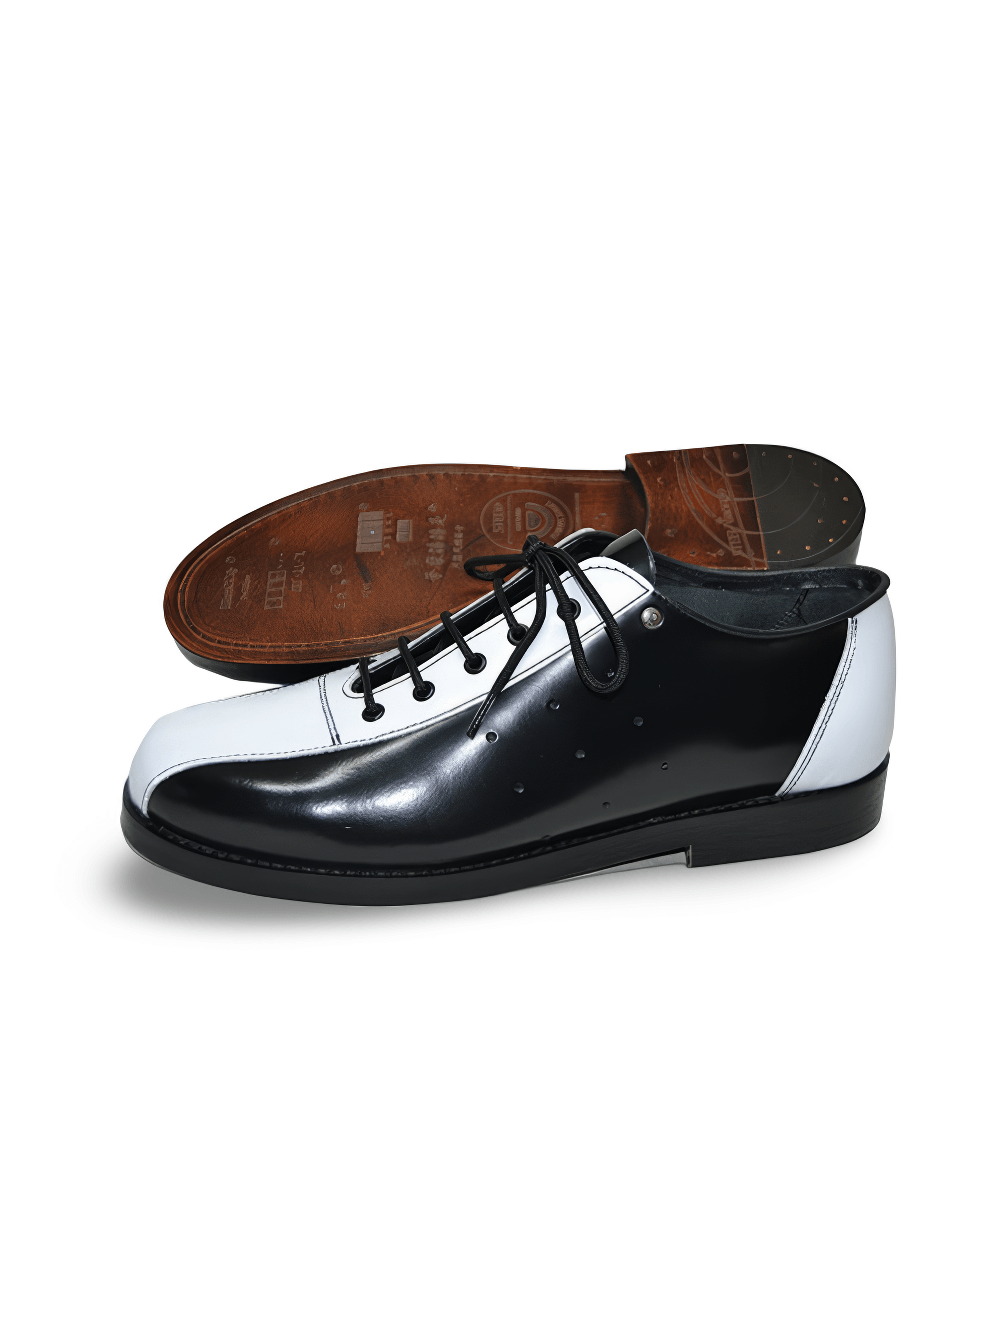 Unisex Classic Lace-Up Bowling Footwear with Flat Sole